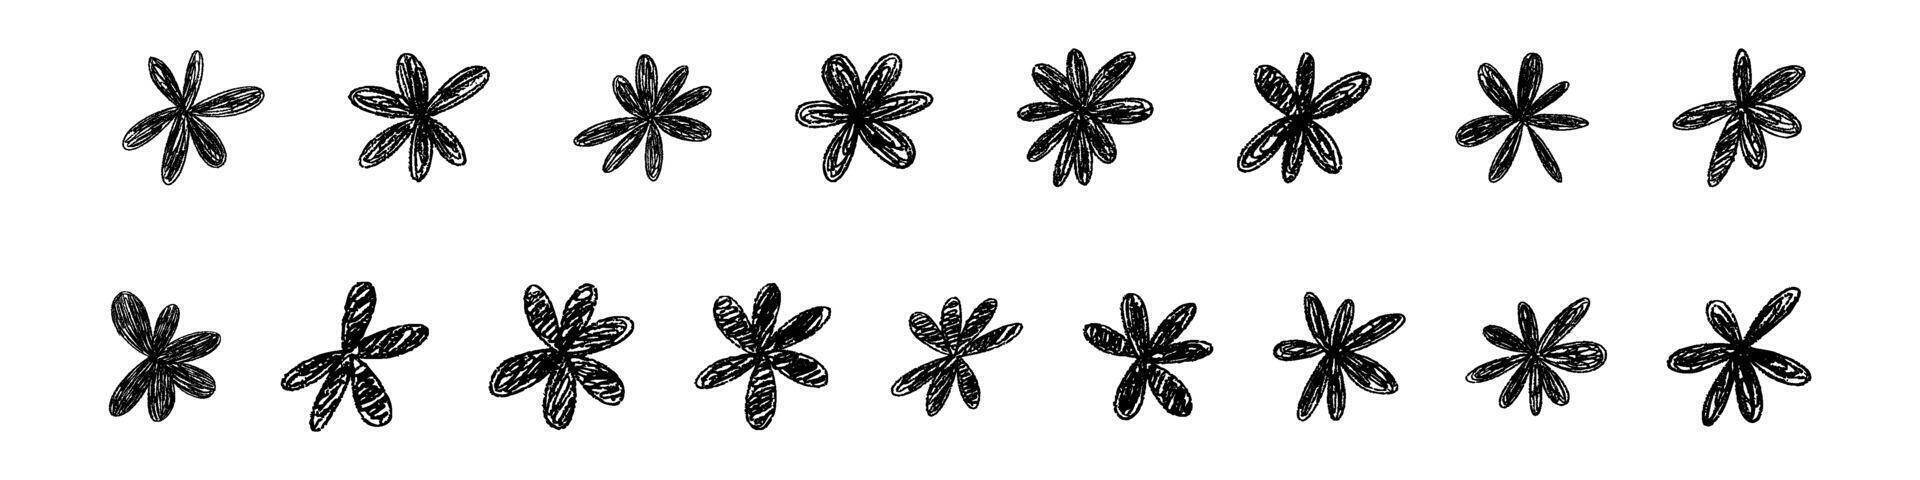 Hand drawn flower doodle, simple line pattern with abstract spring floral shapes. Brush sketch style. Flat vector illustration isolated on white background.